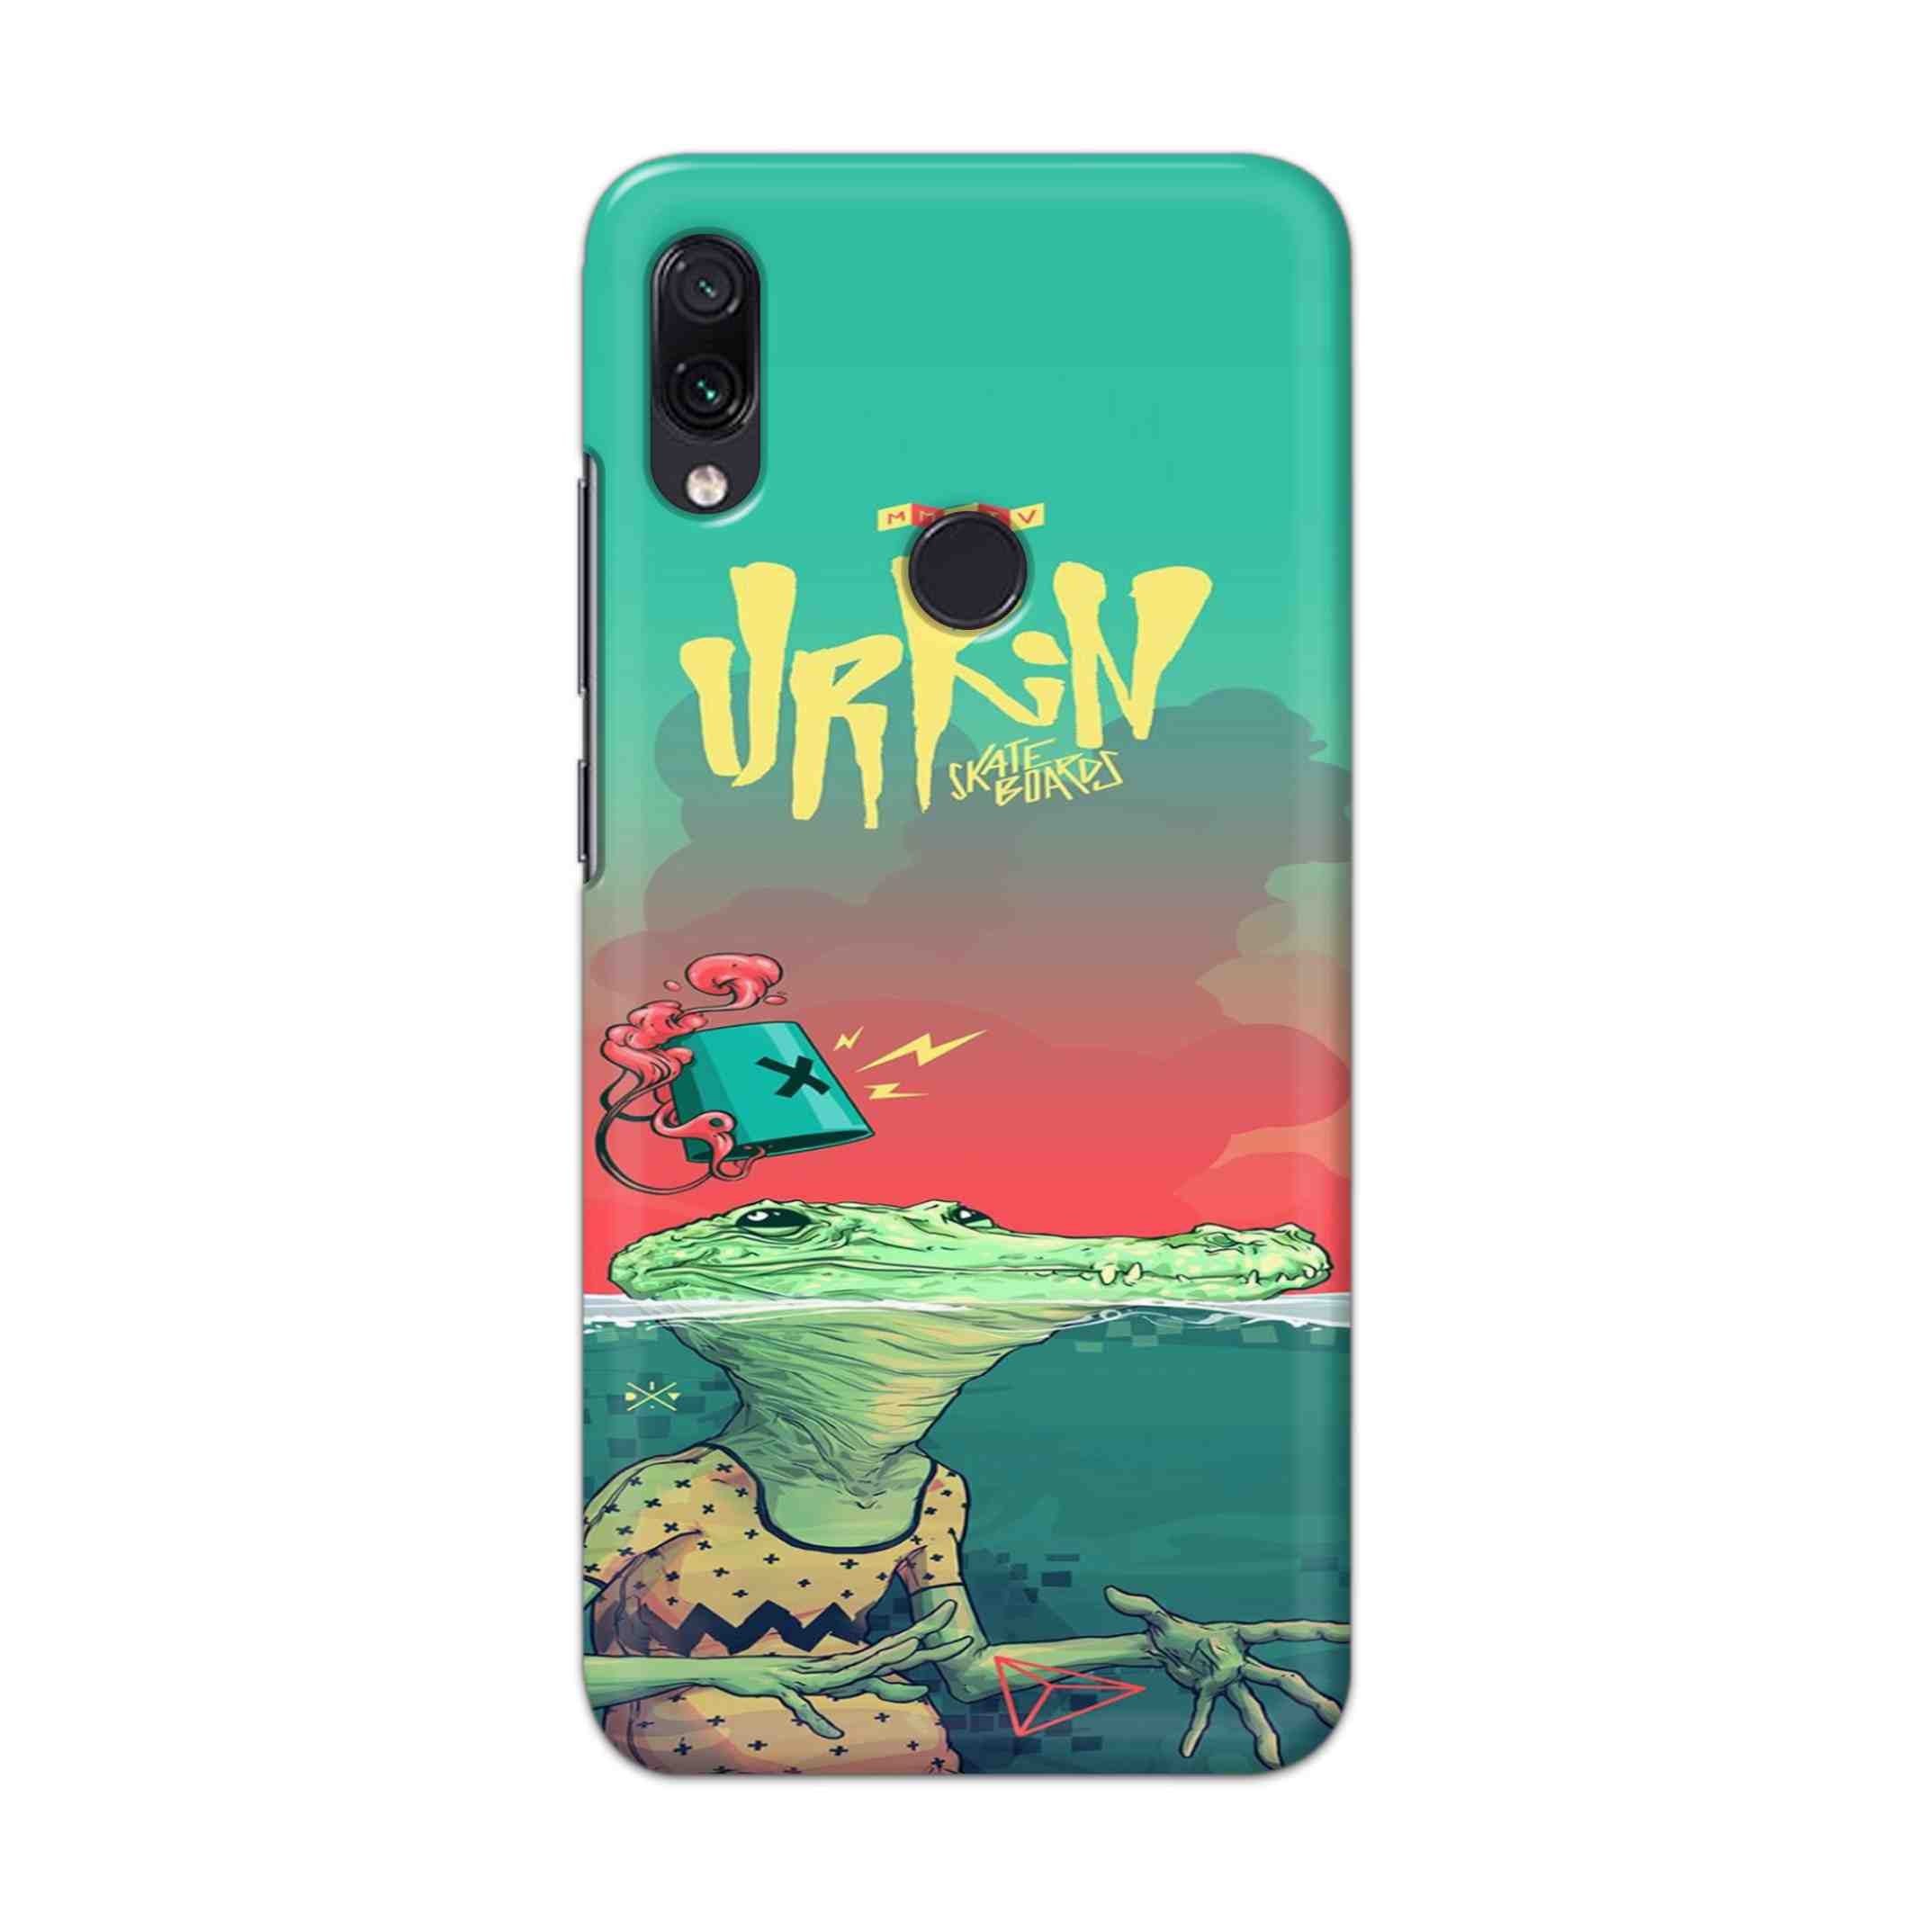 Buy Urkin Hard Back Mobile Phone Case Cover For Xiaomi Redmi 7 Online